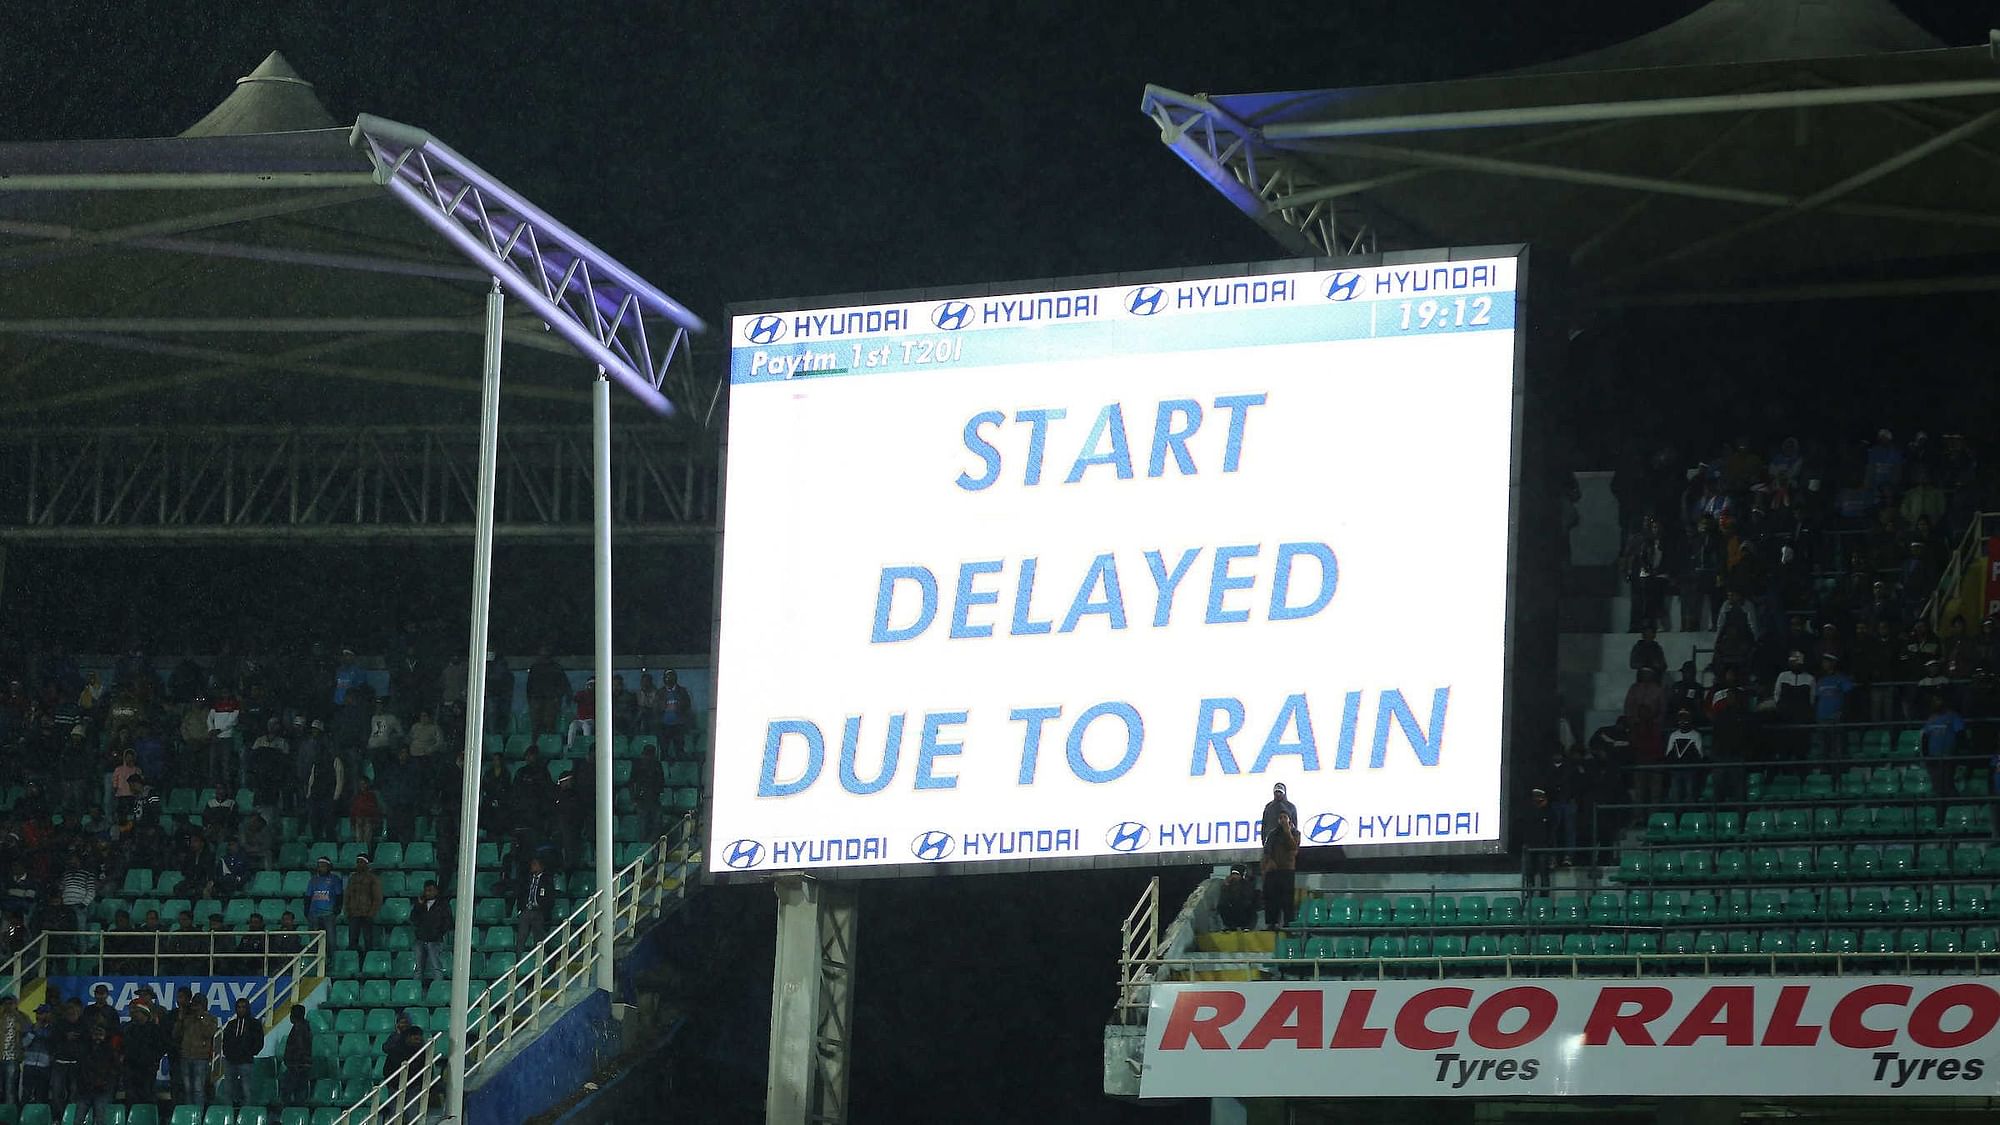 The first T20I between India and Sri Lanka was washed out without a ball being bowled.